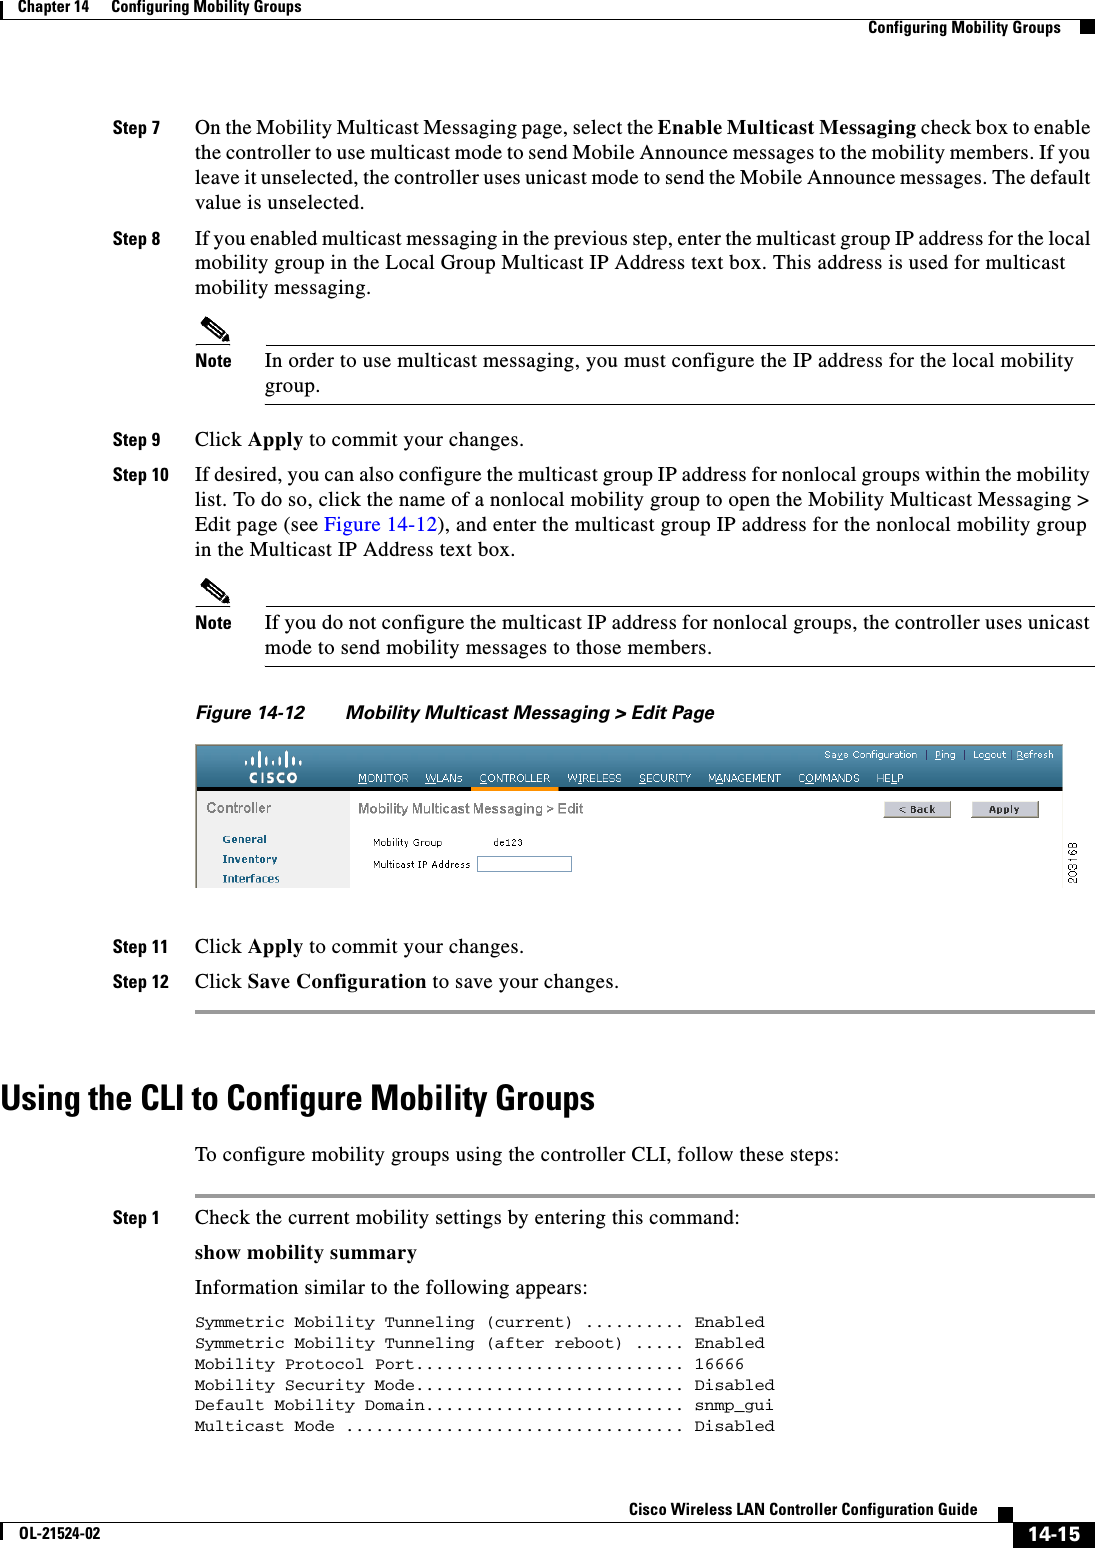  14-15Cisco Wireless LAN Controller Configuration GuideOL-21524-02Chapter 14      Configuring Mobility Groups  Configuring Mobility GroupsStep 7 On the Mobility Multicast Messaging page, select the Enable Multicast Messaging check box to enable the controller to use multicast mode to send Mobile Announce messages to the mobility members. If you leave it unselected, the controller uses unicast mode to send the Mobile Announce messages. The default value is unselected.Step 8 If you enabled multicast messaging in the previous step, enter the multicast group IP address for the local mobility group in the Local Group Multicast IP Address text box. This address is used for multicast mobility messaging.Note In order to use multicast messaging, you must configure the IP address for the local mobility group.Step 9 Click Apply to commit your changes.Step 10 If desired, you can also configure the multicast group IP address for nonlocal groups within the mobility list. To do so, click the name of a nonlocal mobility group to open the Mobility Multicast Messaging &gt; Edit page (see Figure 14-12), and enter the multicast group IP address for the nonlocal mobility group in the Multicast IP Address text box.Note If you do not configure the multicast IP address for nonlocal groups, the controller uses unicast mode to send mobility messages to those members.Figure 14-12 Mobility Multicast Messaging &gt; Edit PageStep 11 Click Apply to commit your changes.Step 12 Click Save Configuration to save your changes.Using the CLI to Configure Mobility GroupsTo configure mobility groups using the controller CLI, follow these steps:Step 1 Check the current mobility settings by entering this command:show mobility summaryInformation similar to the following appears:Symmetric Mobility Tunneling (current) .......... EnabledSymmetric Mobility Tunneling (after reboot) ..... EnabledMobility Protocol Port........................... 16666Mobility Security Mode........................... DisabledDefault Mobility Domain.......................... snmp_guiMulticast Mode .................................. Disabled